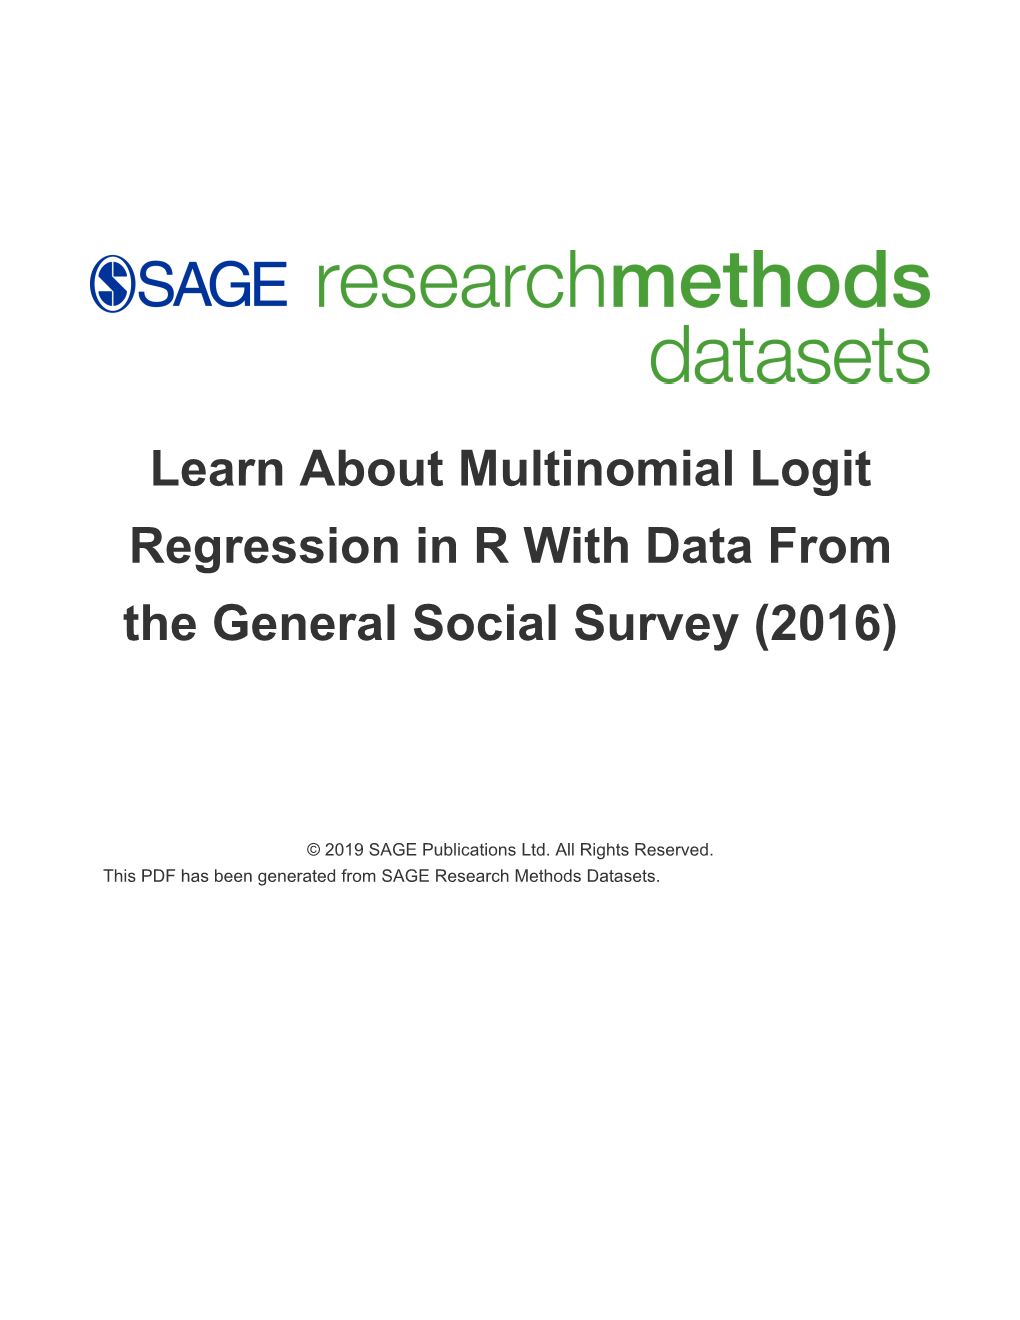 Learn About Multinomial Logit Regression in R with Data from the General Social Survey (2016)